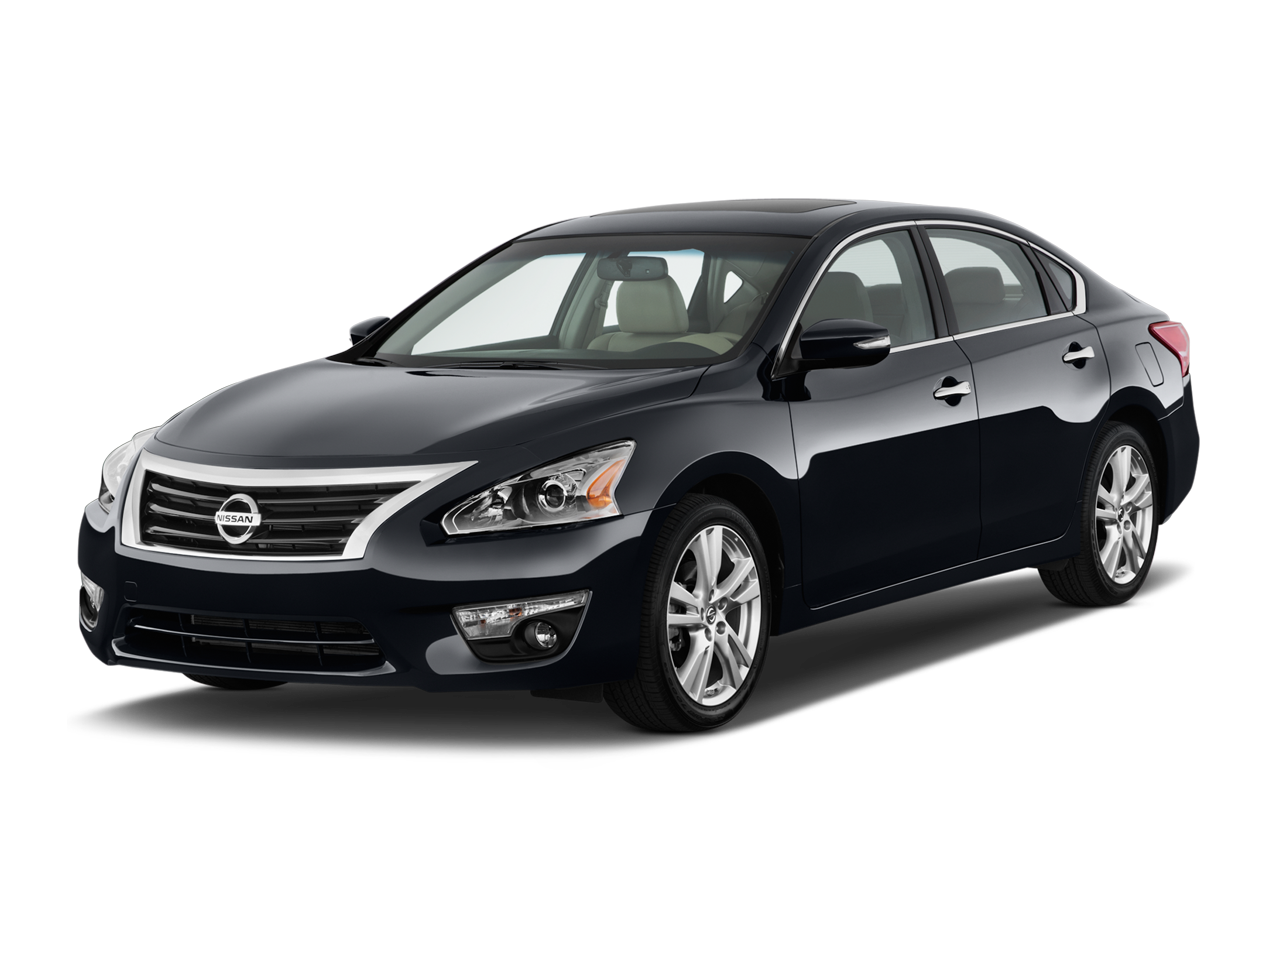 2013 Nissan Altima in black against white background